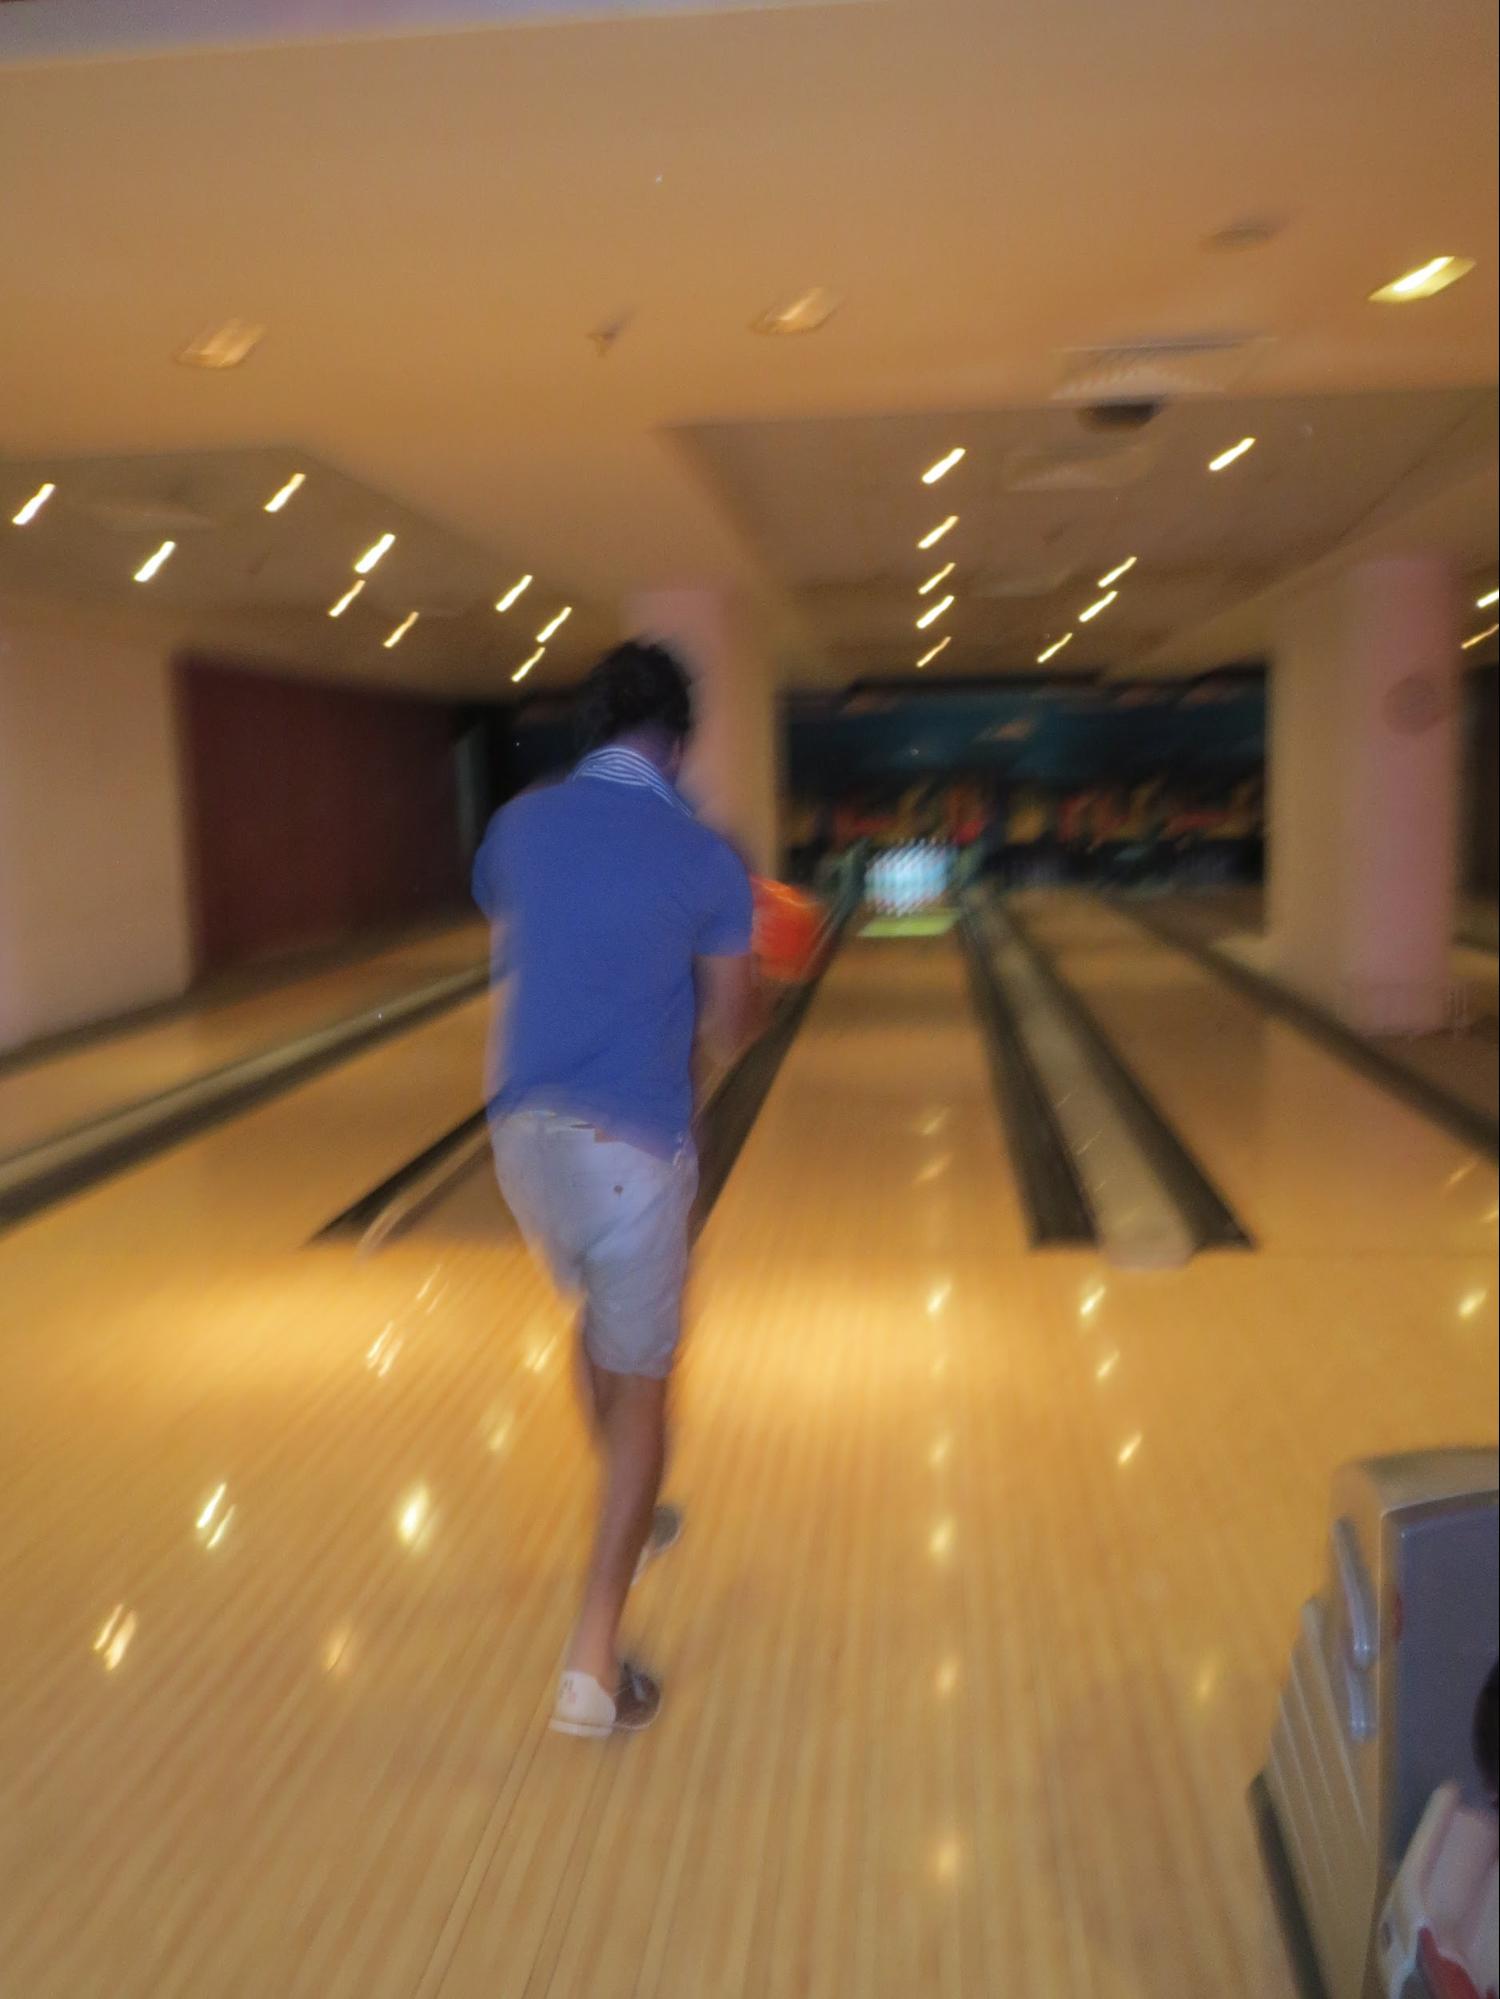 Kempinski Hotel, Ajman Review - Played Bowling - Games included in our package